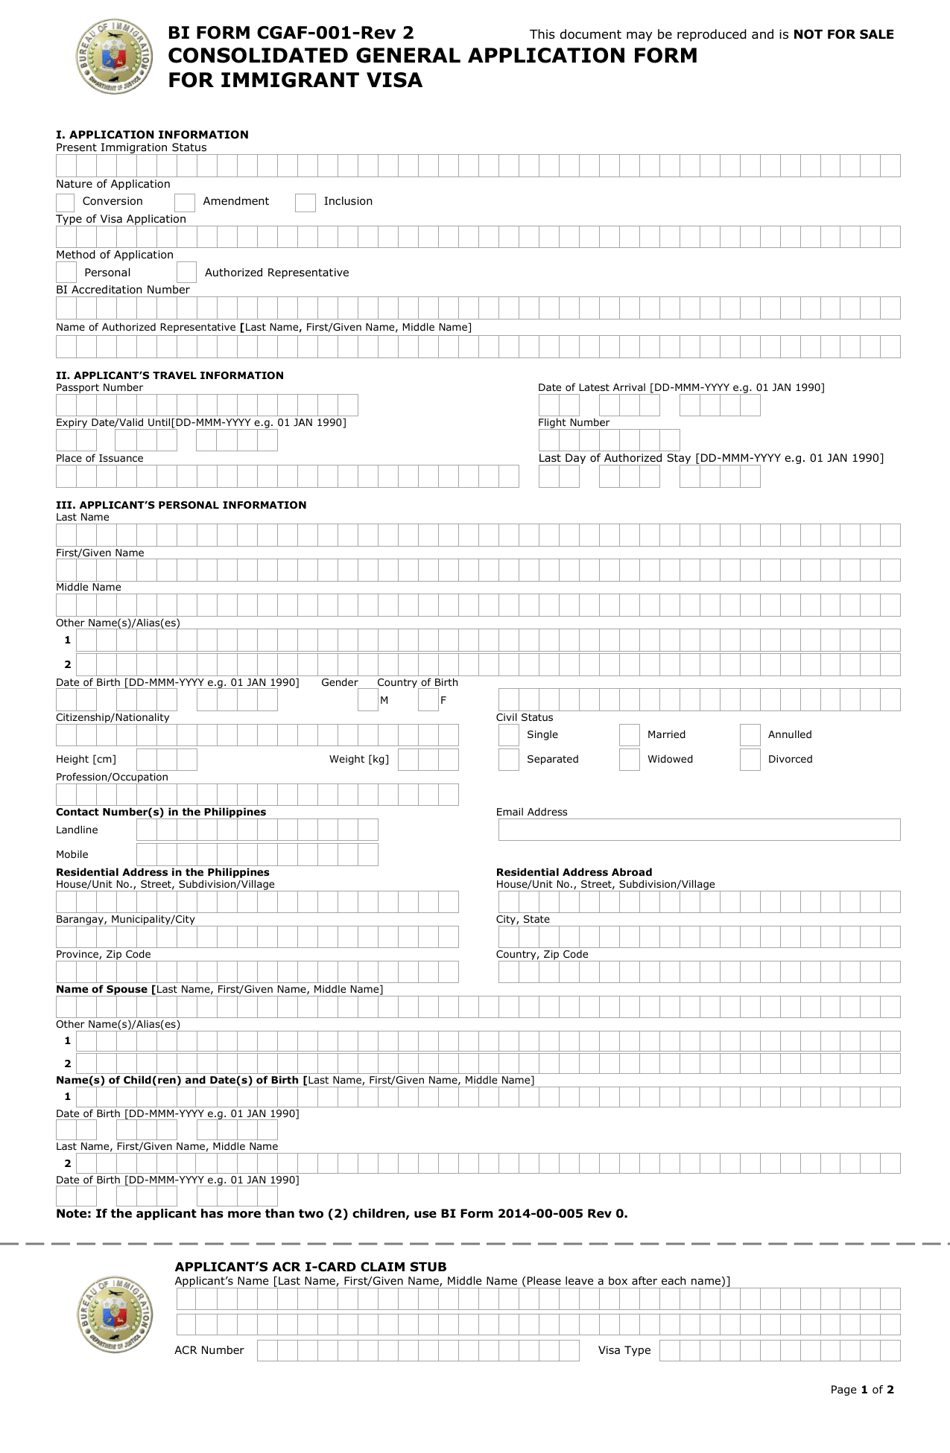 BI Form CGAF-001 REV 2 Consolidated General Application Form for Immigrant Visa - Philippines, Page 1